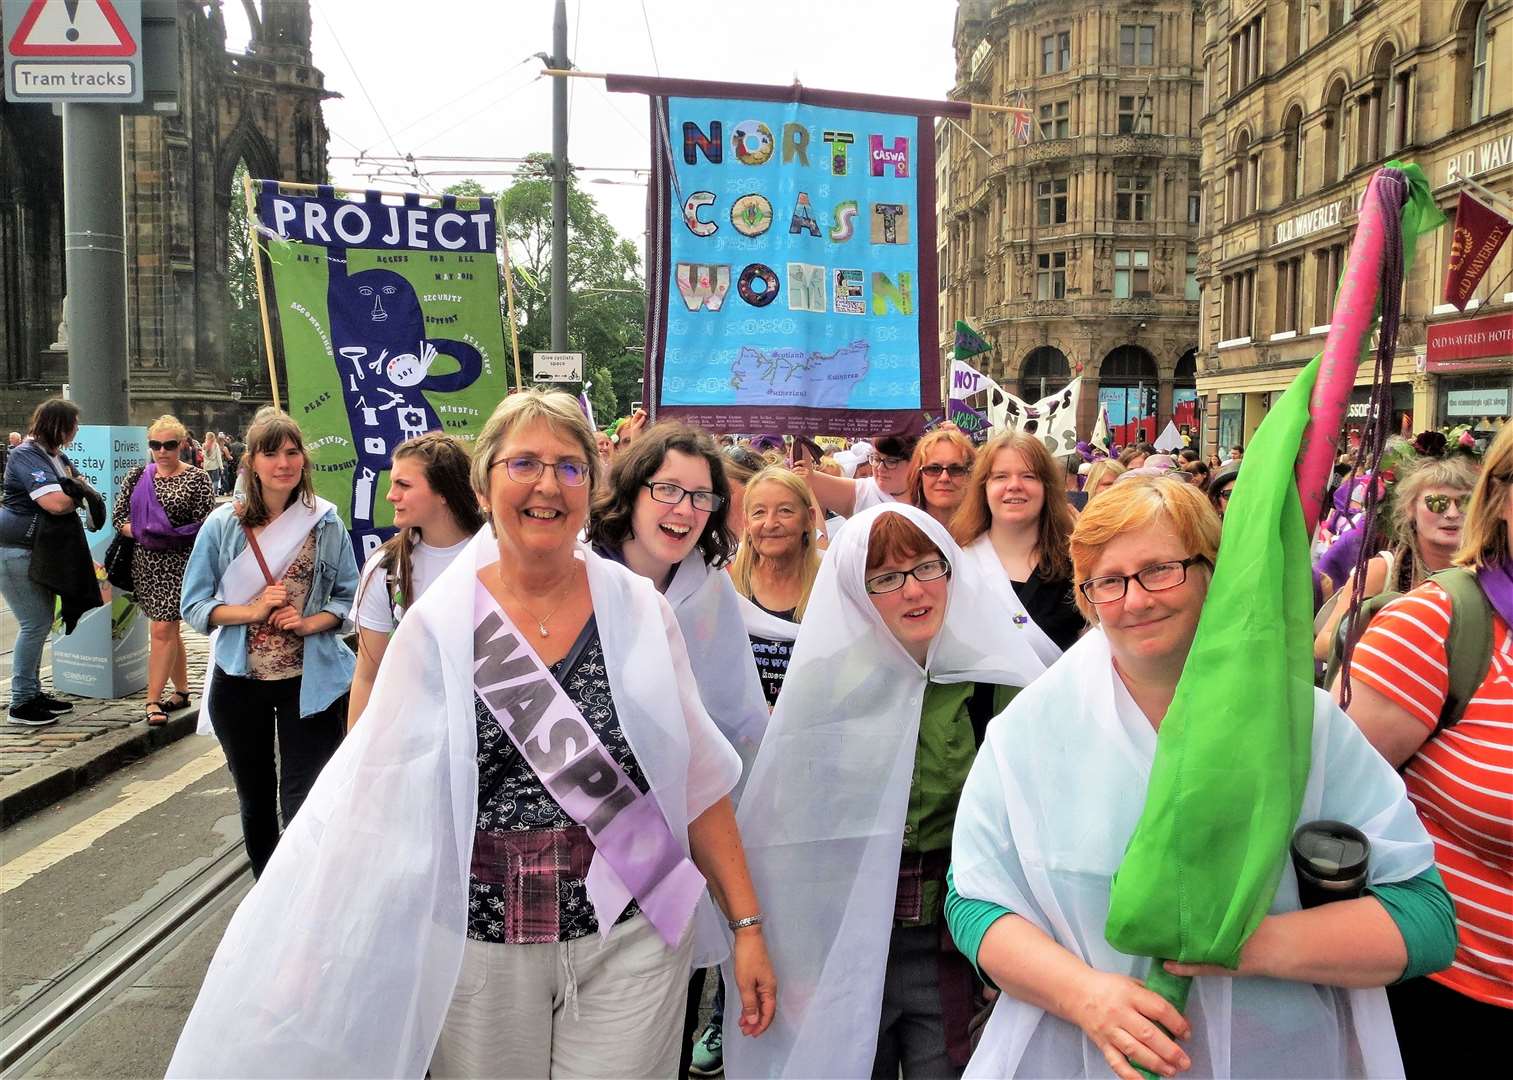 North Coast Women on Princes Street, Edinburgh during the Processions March in 2018.